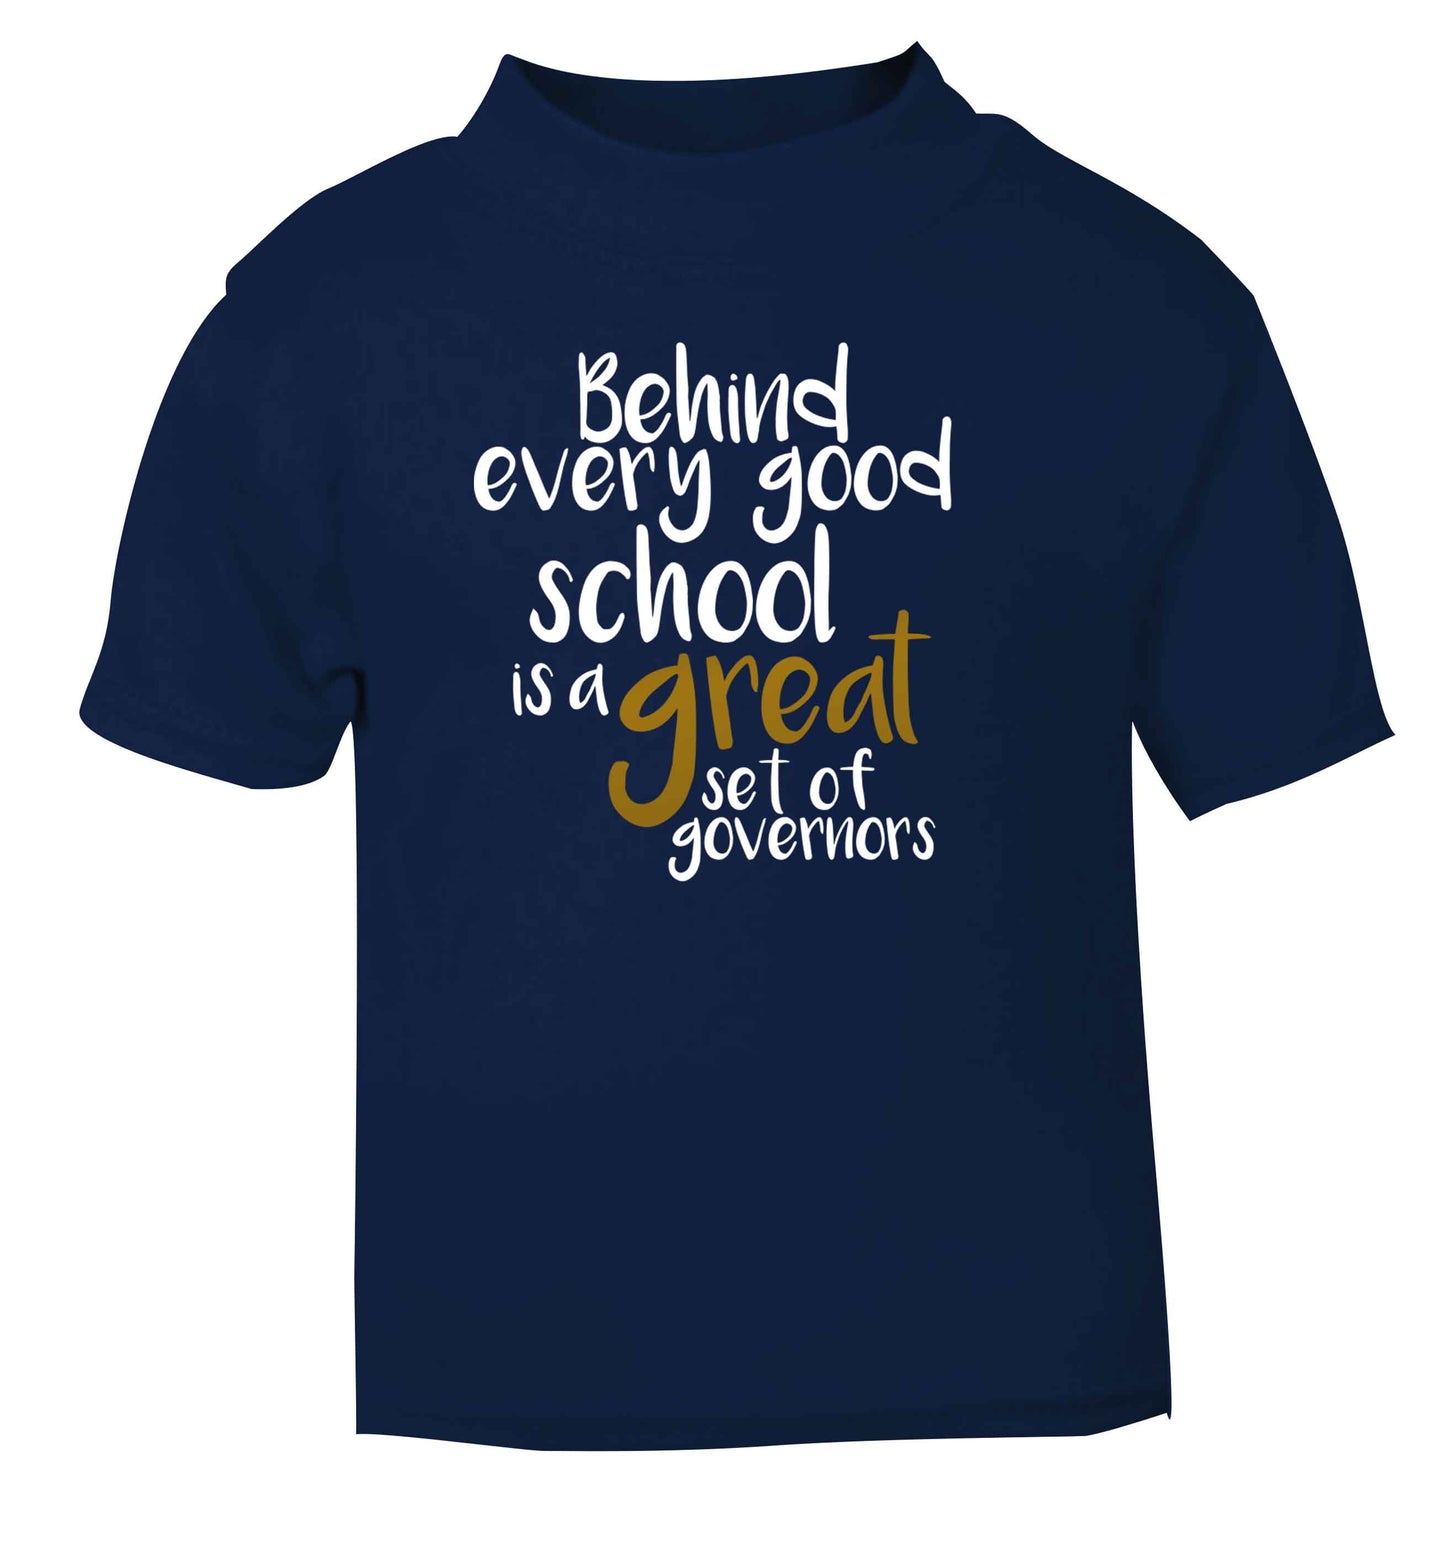 Behind every good school is a great set of governors navy Baby Toddler Tshirt 2 Years